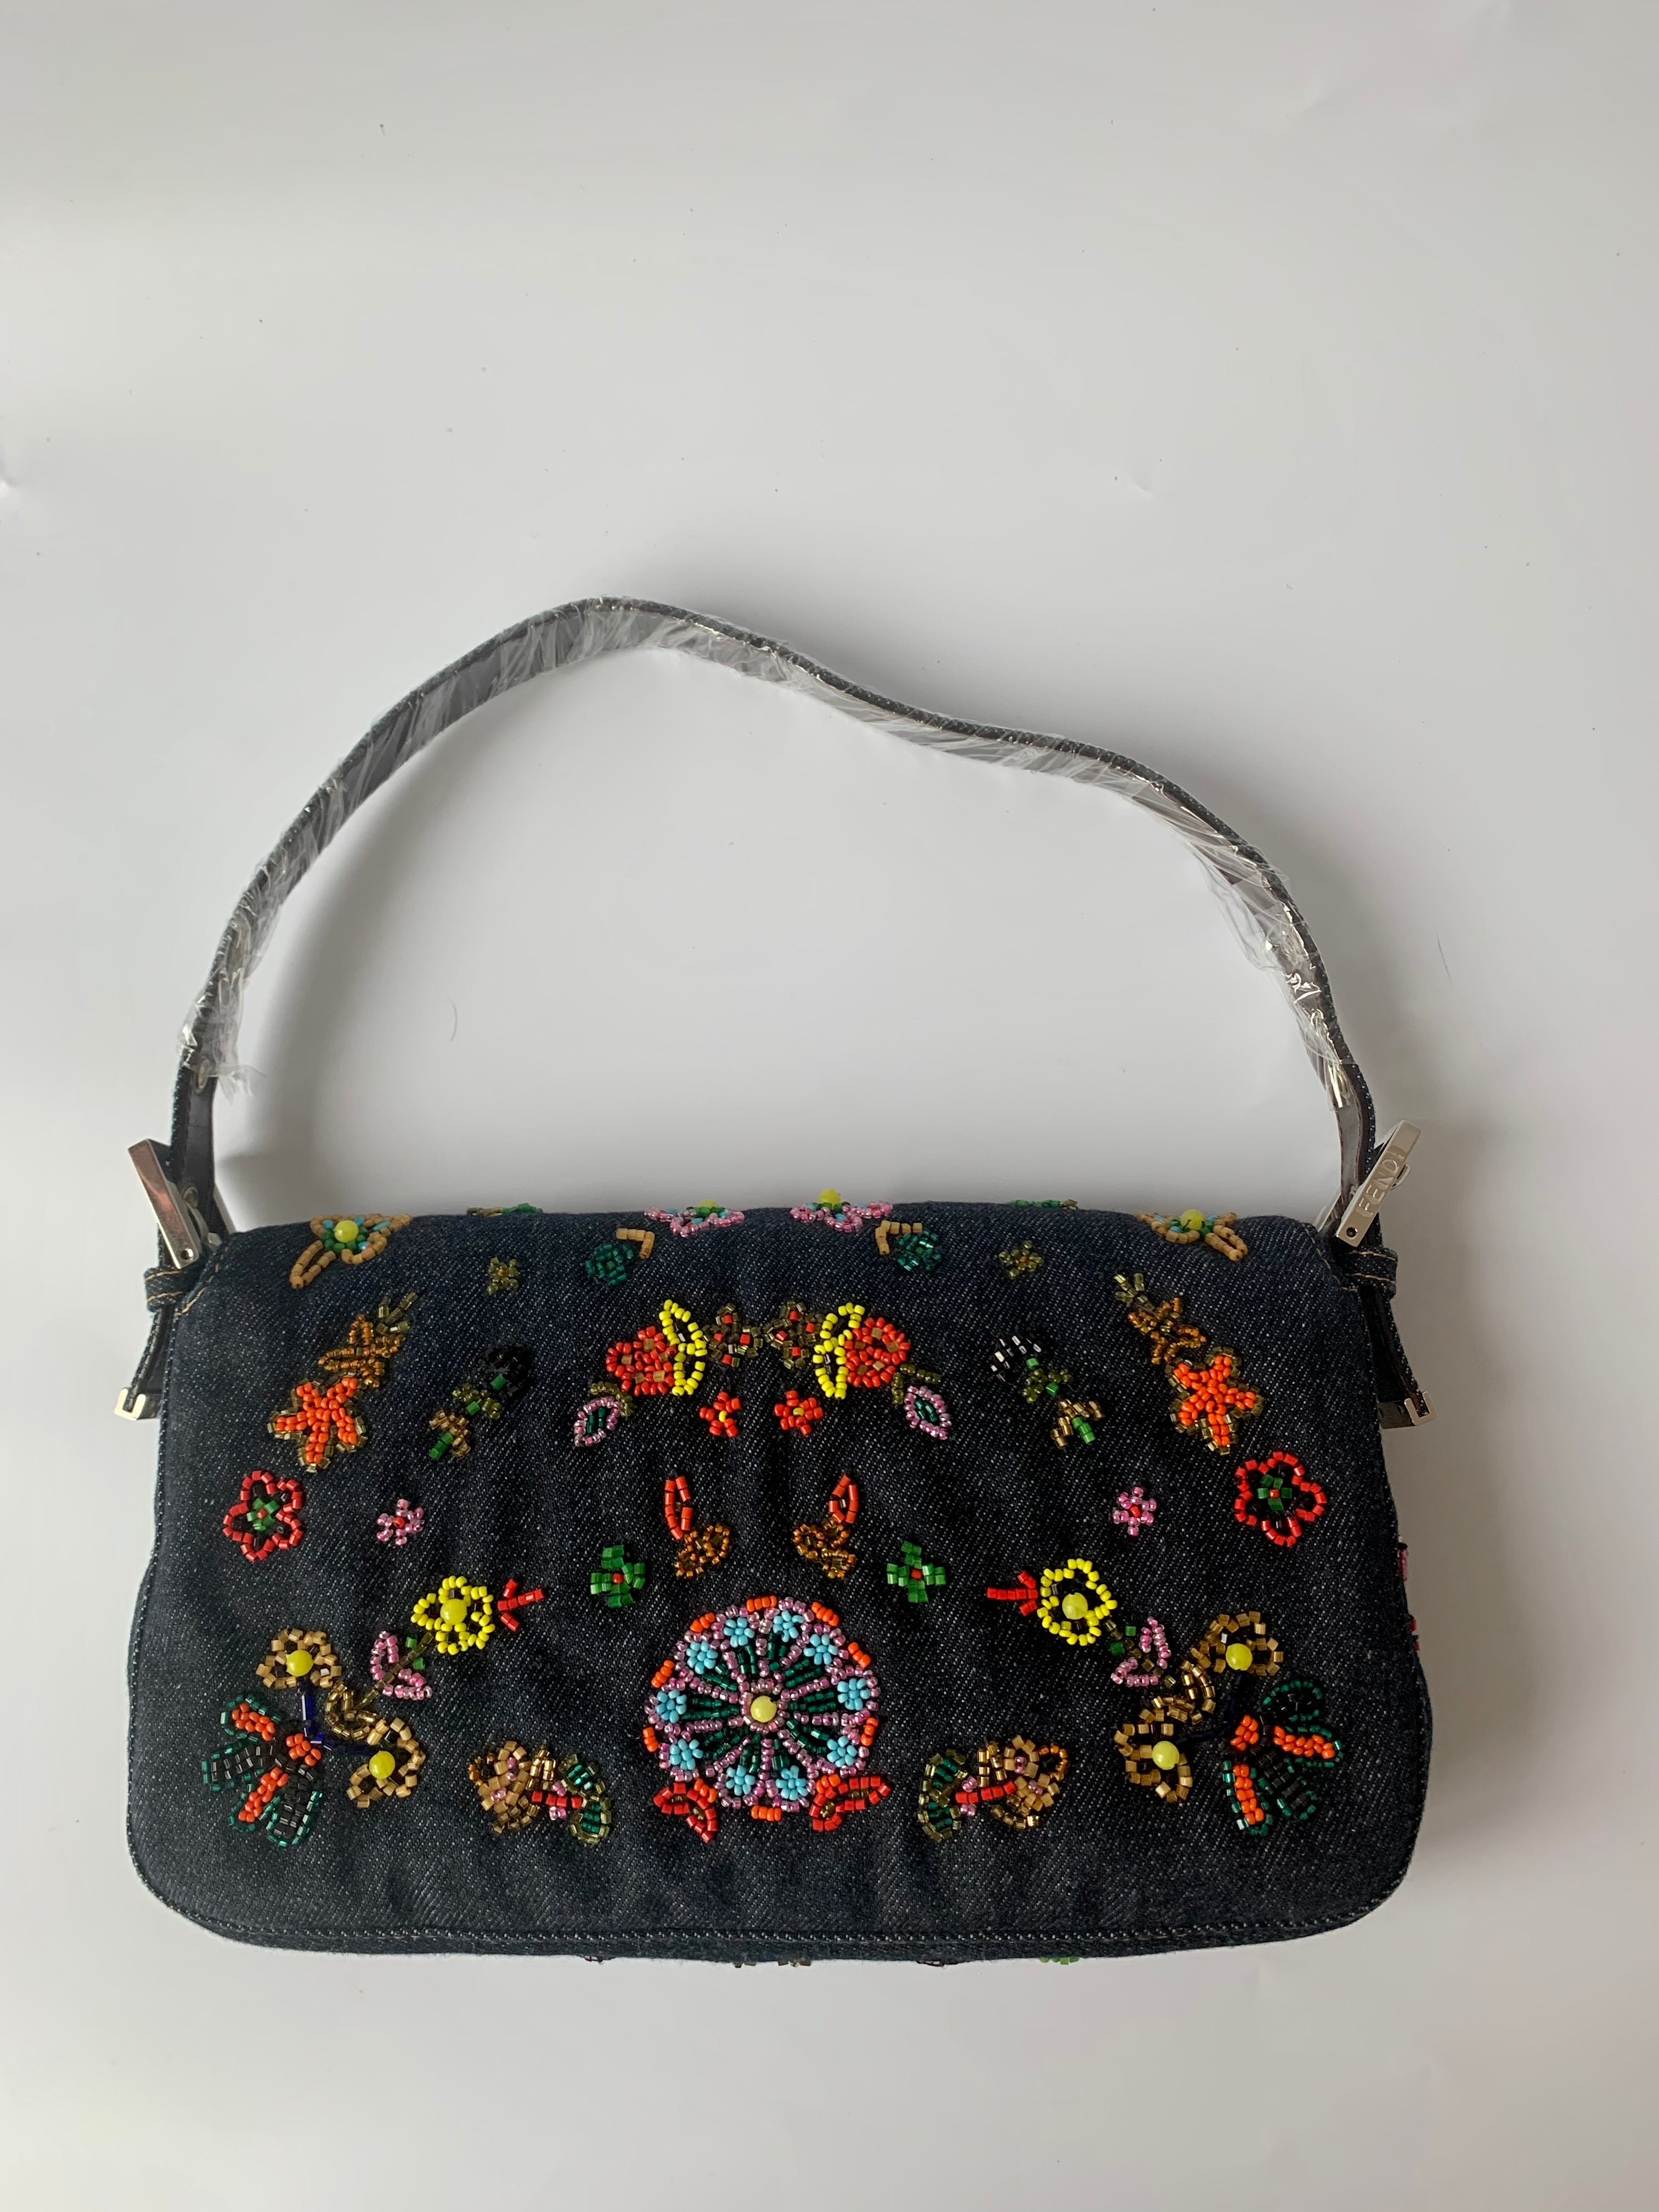 Sold FENDI Baguette Blue Denim with beaded Flower Embroidery